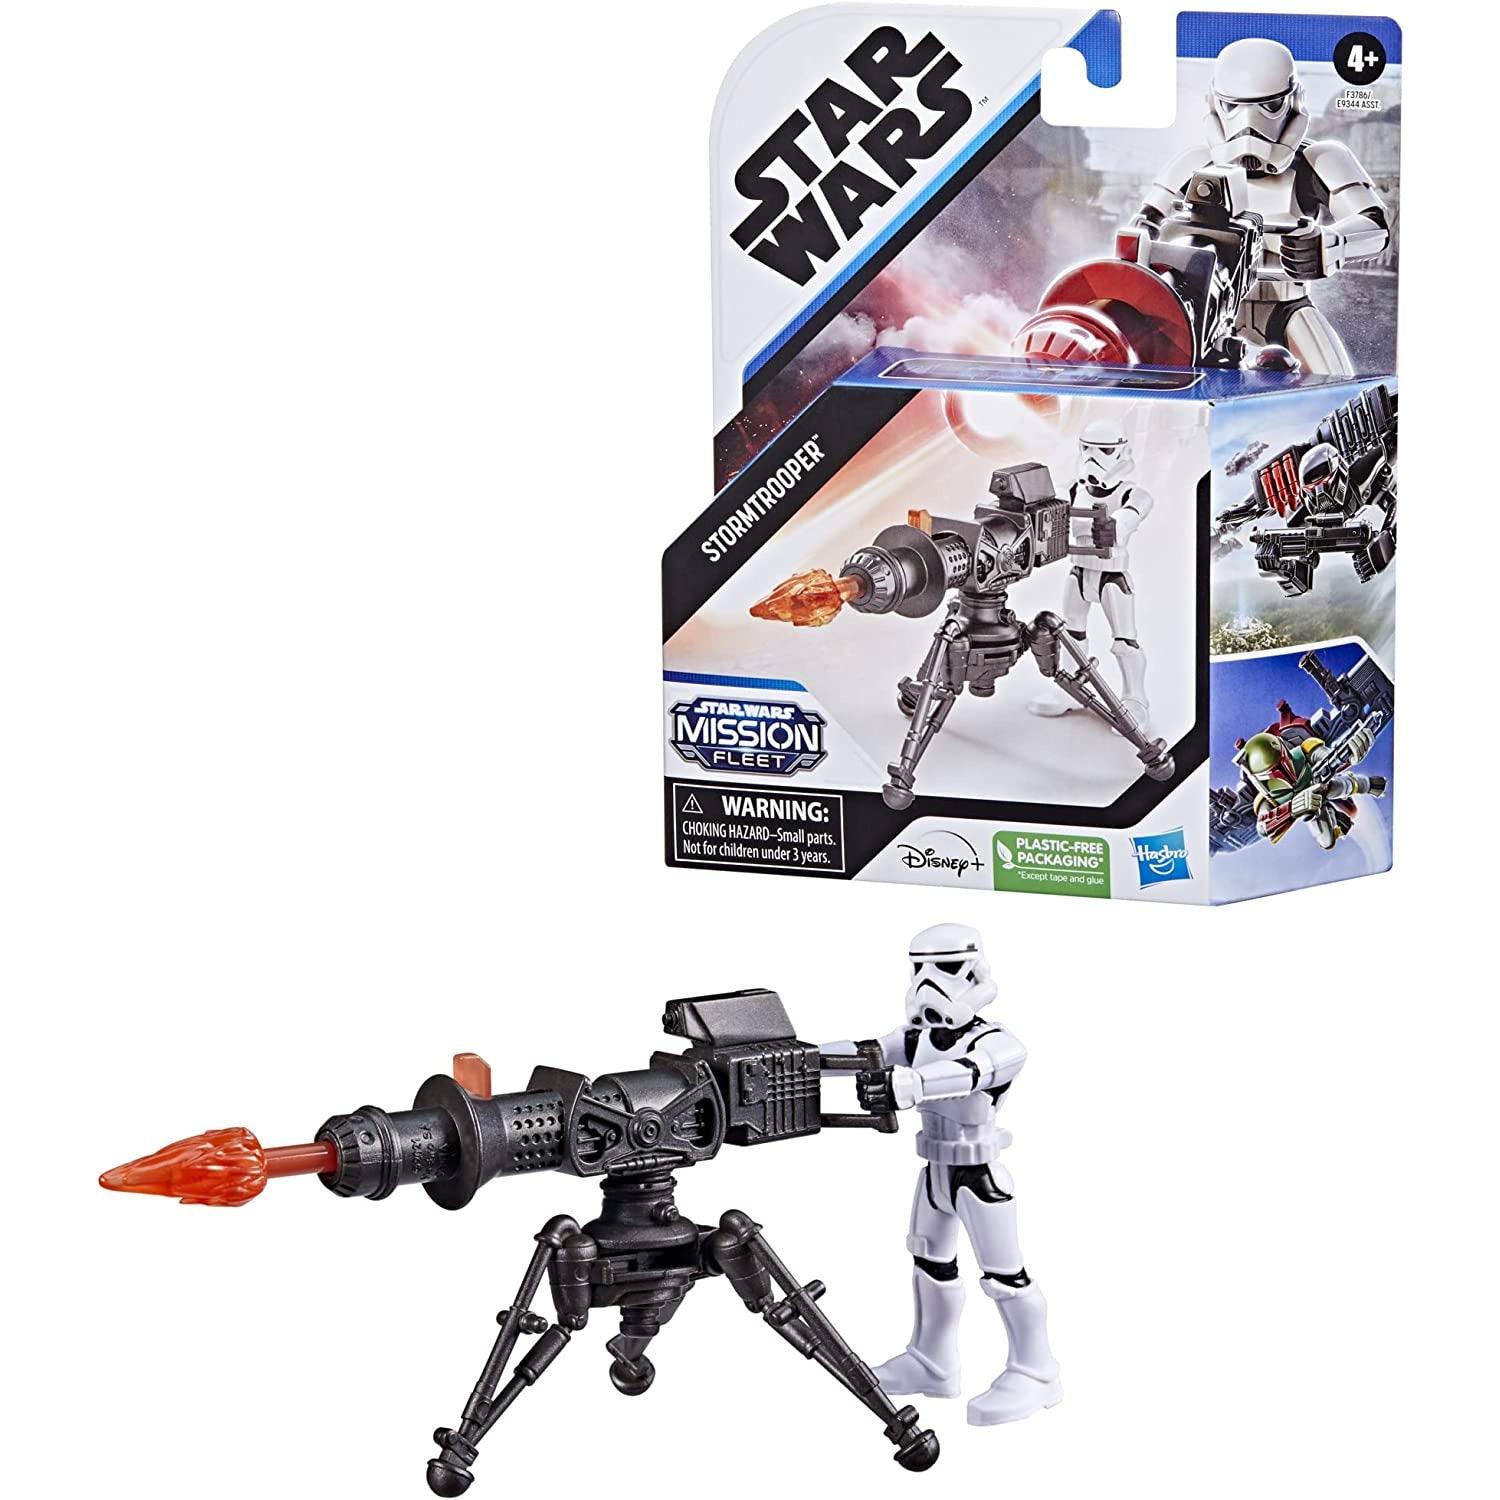 Star Wars Mission Fleet Gear Class Imperial Cannon Assault, 2.5-Inch-Scale Stormtrooper Action Figure - BumbleToys - 4+ Years, Action Figures, Boys, Characters, OXE, star wars, Stormtrooper